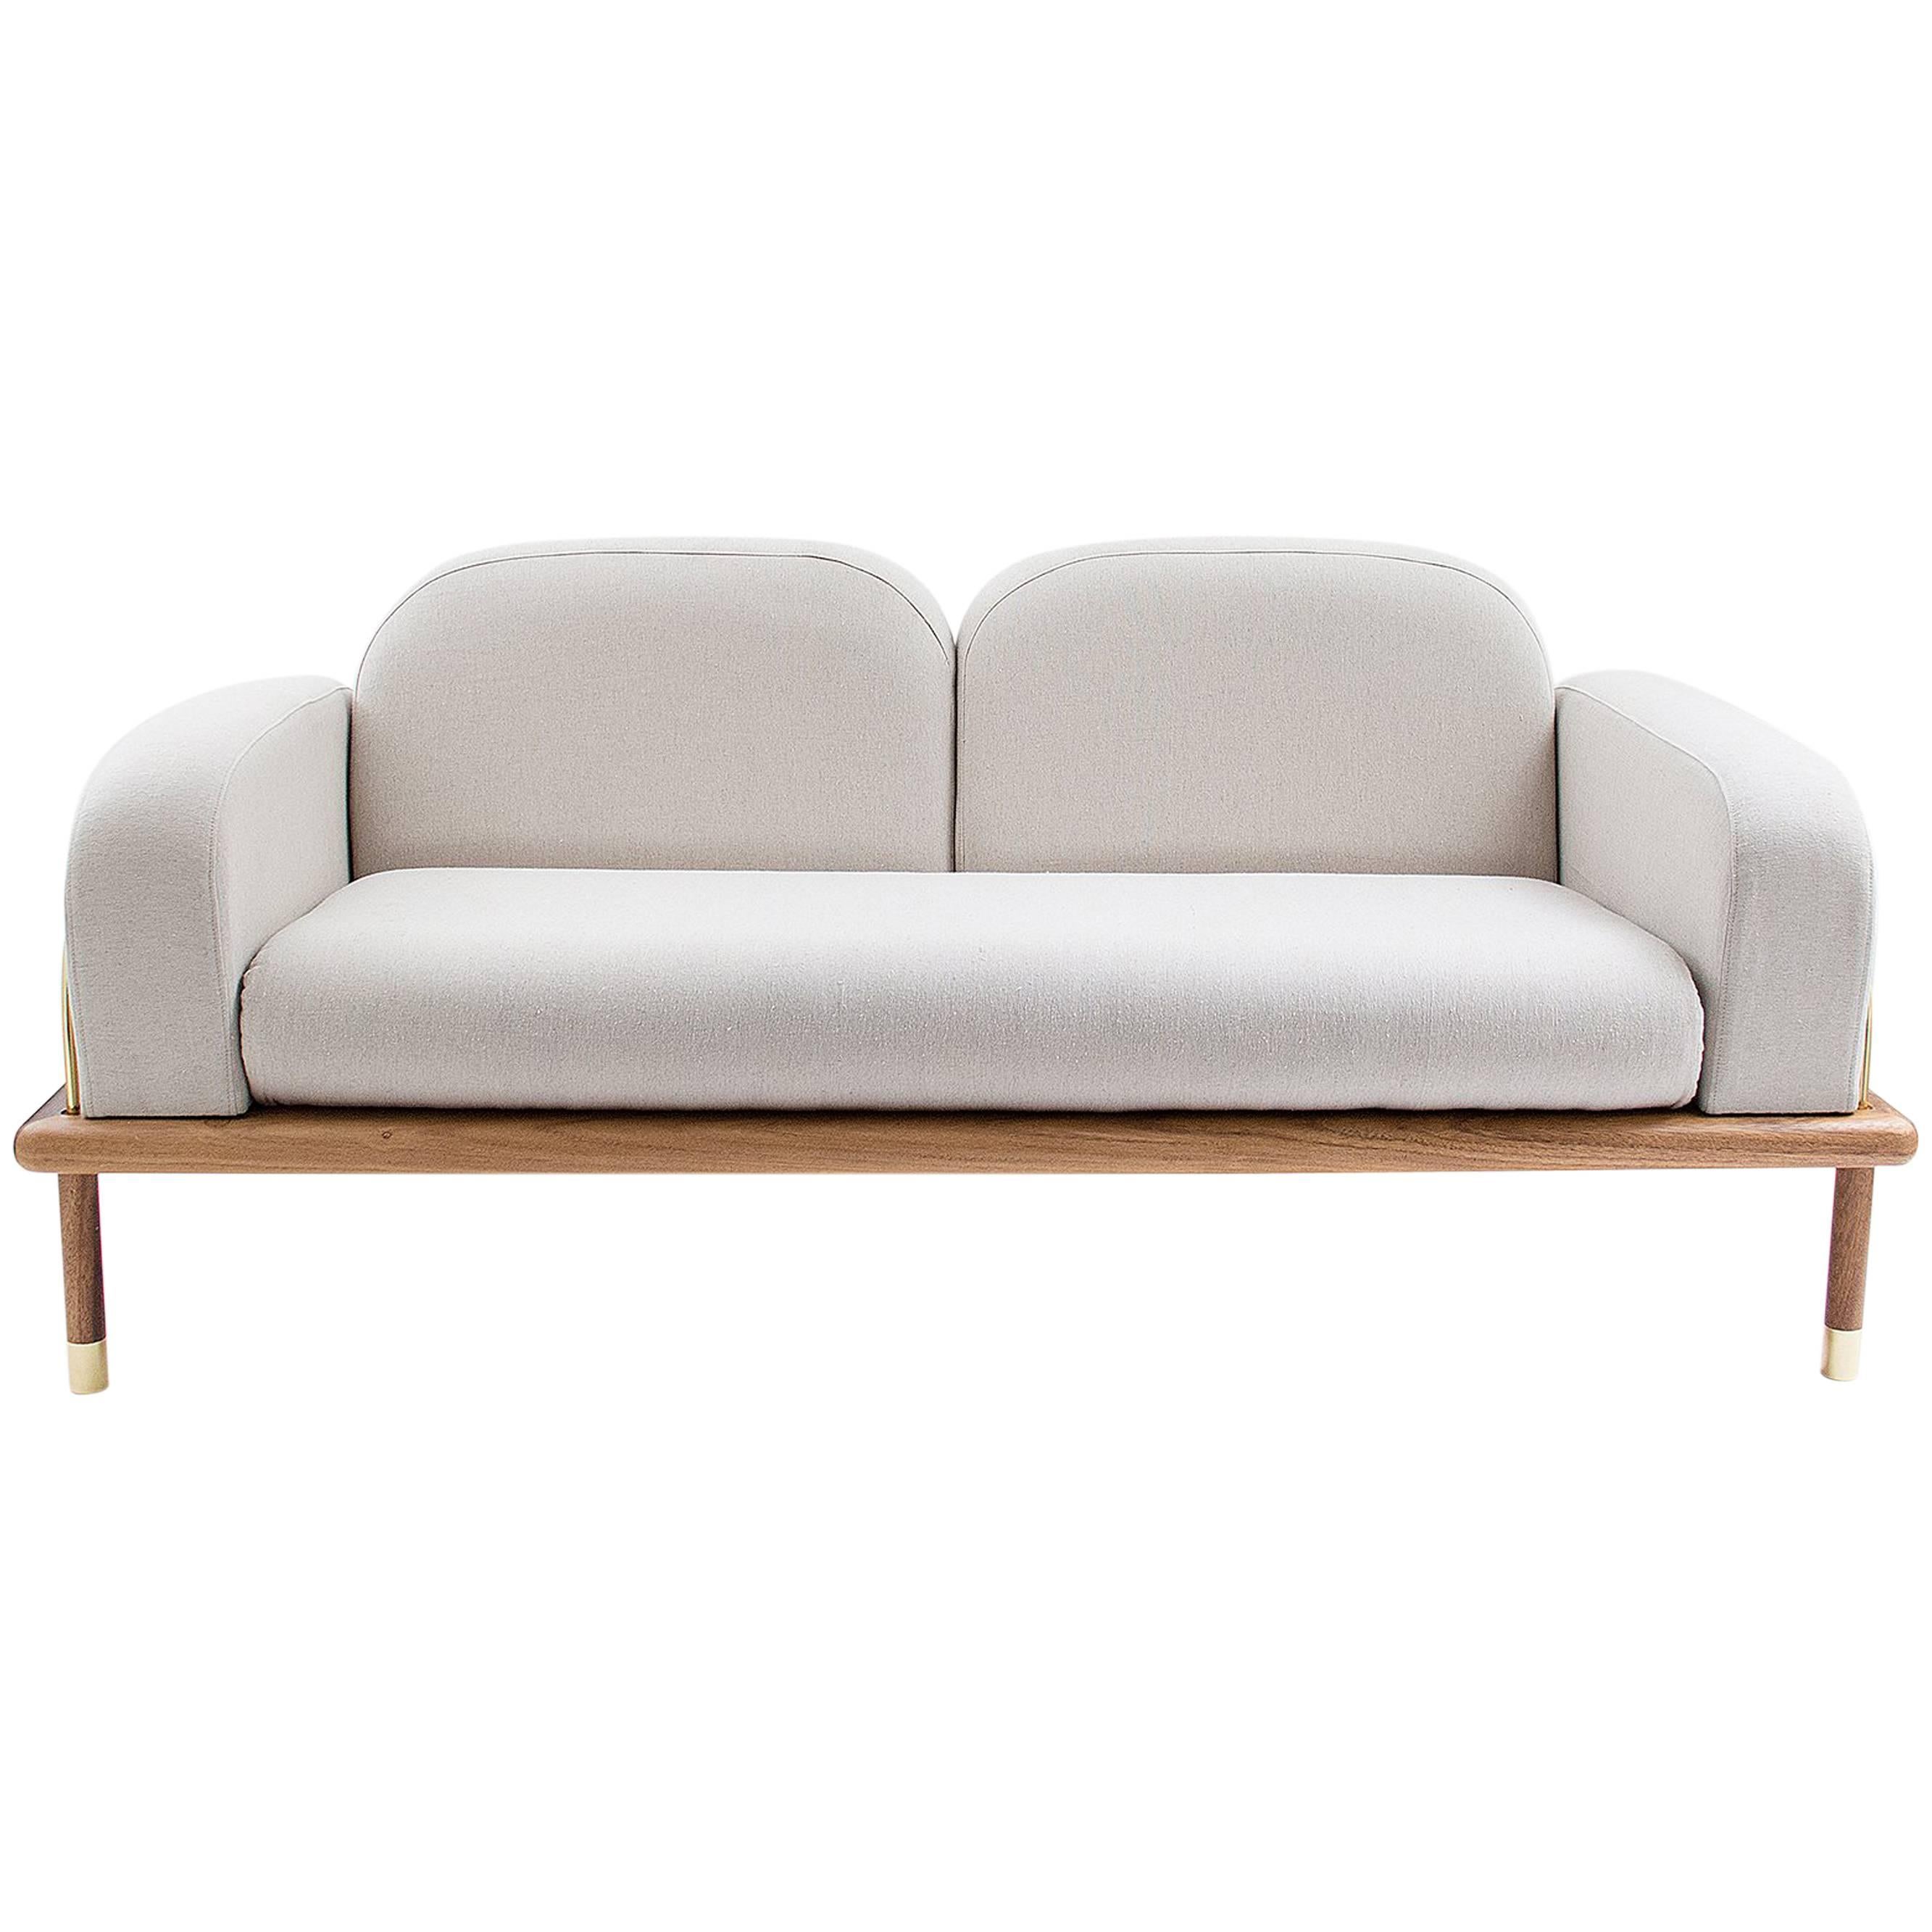 Prado/Sofa in Parota Wood and Details in Cooper or Brass For Sale